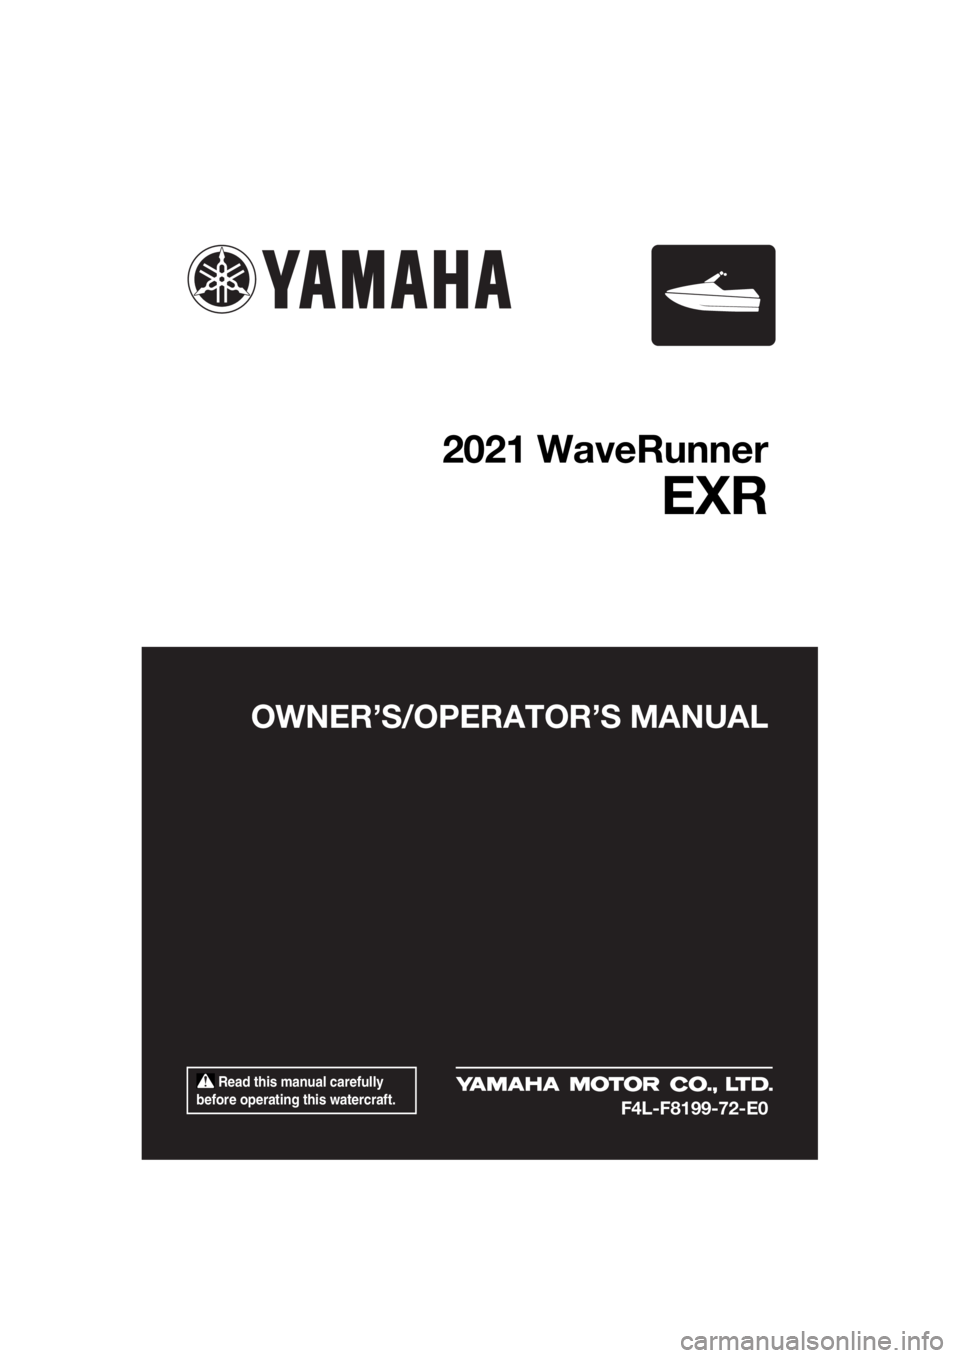 YAMAHA EXR 2021  Owners Manual  Read this manual carefully 
before operating this watercraft.
OWNER’S/OPERAT OR’S MANUAL
2021 WaveRunner
EXR
F4L-F8199-72-E0
UF4L72E0.book  Page 1  Thursday, June 18, 2020  1:29 PM 